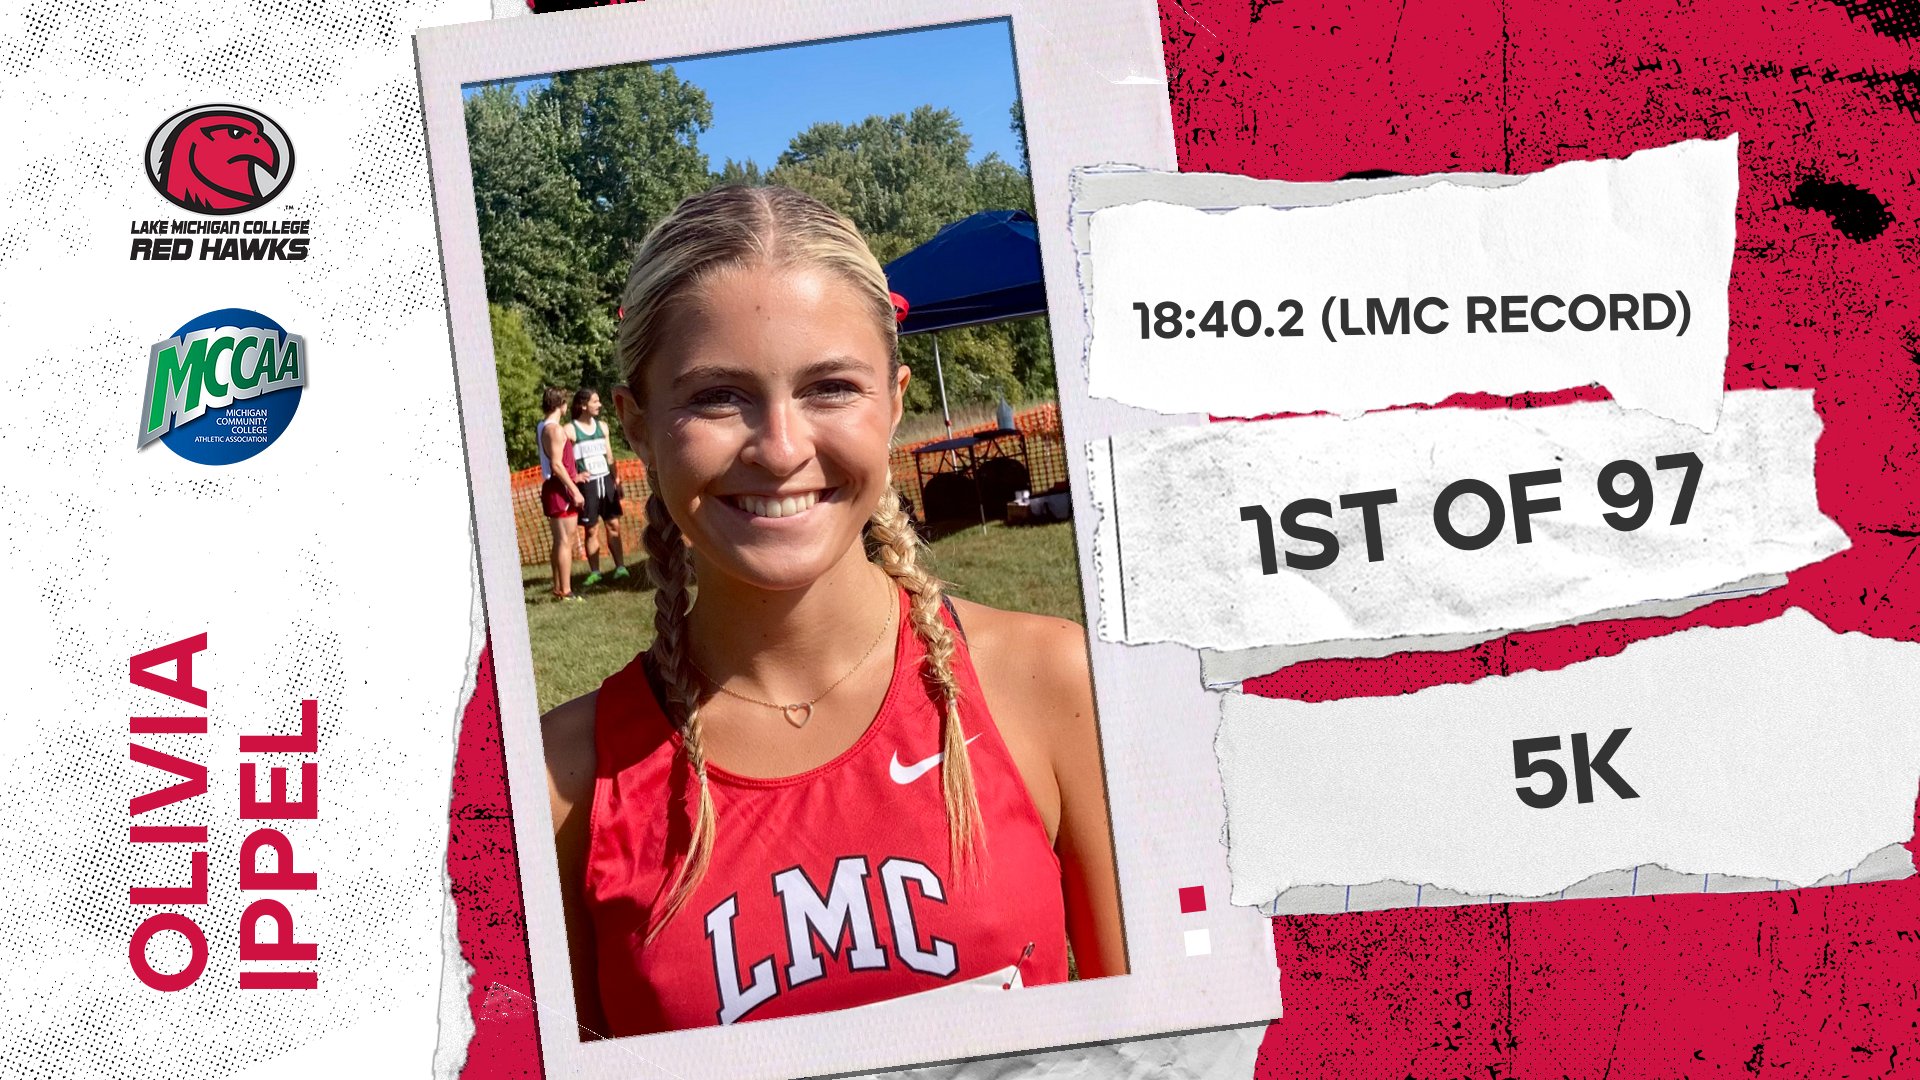 Lake Michigan's Olivia Ippel is the MCCAA Women's Cross Country Runner of the Week5